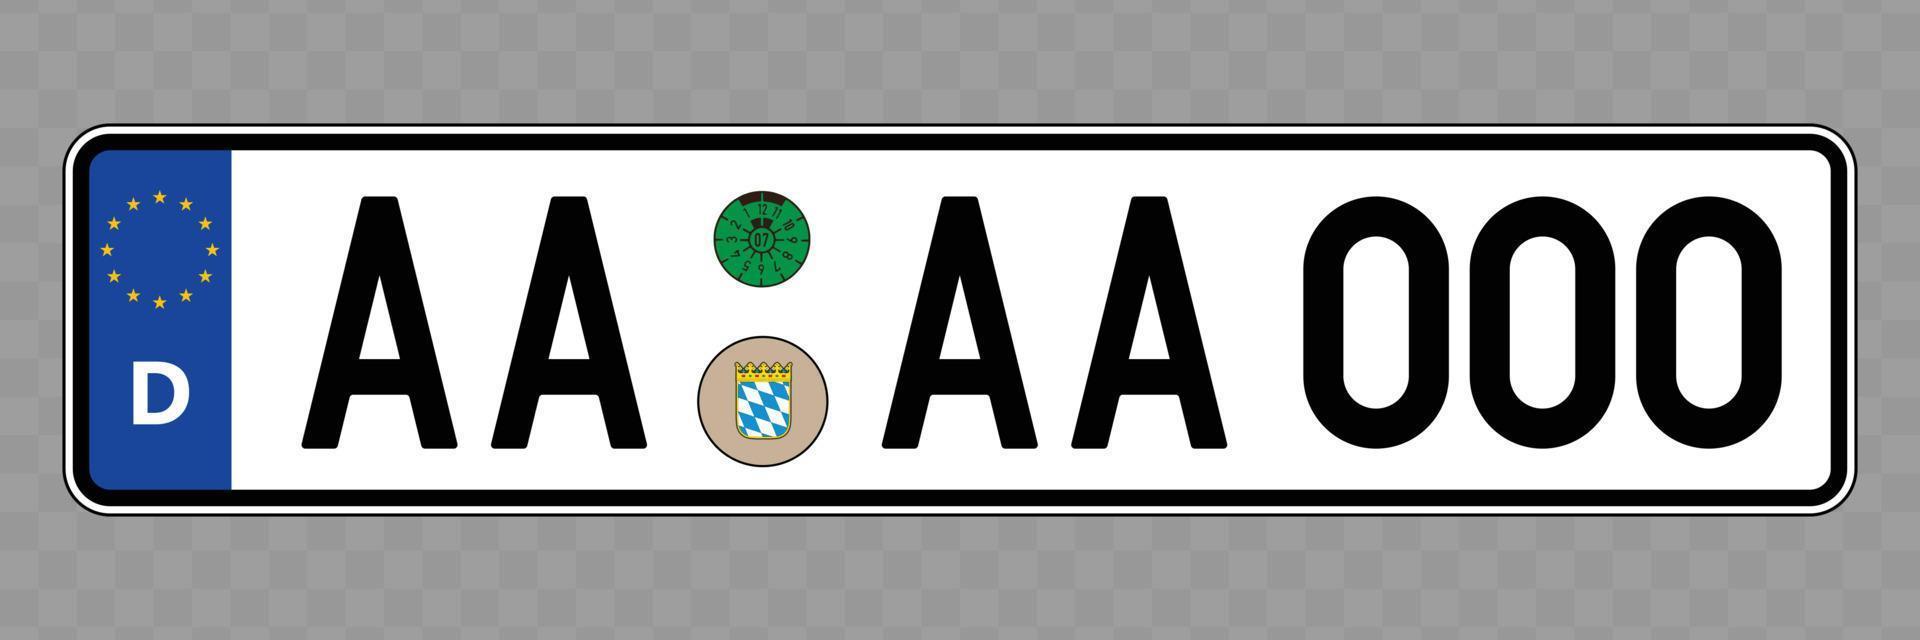 Vehicle number plate vector